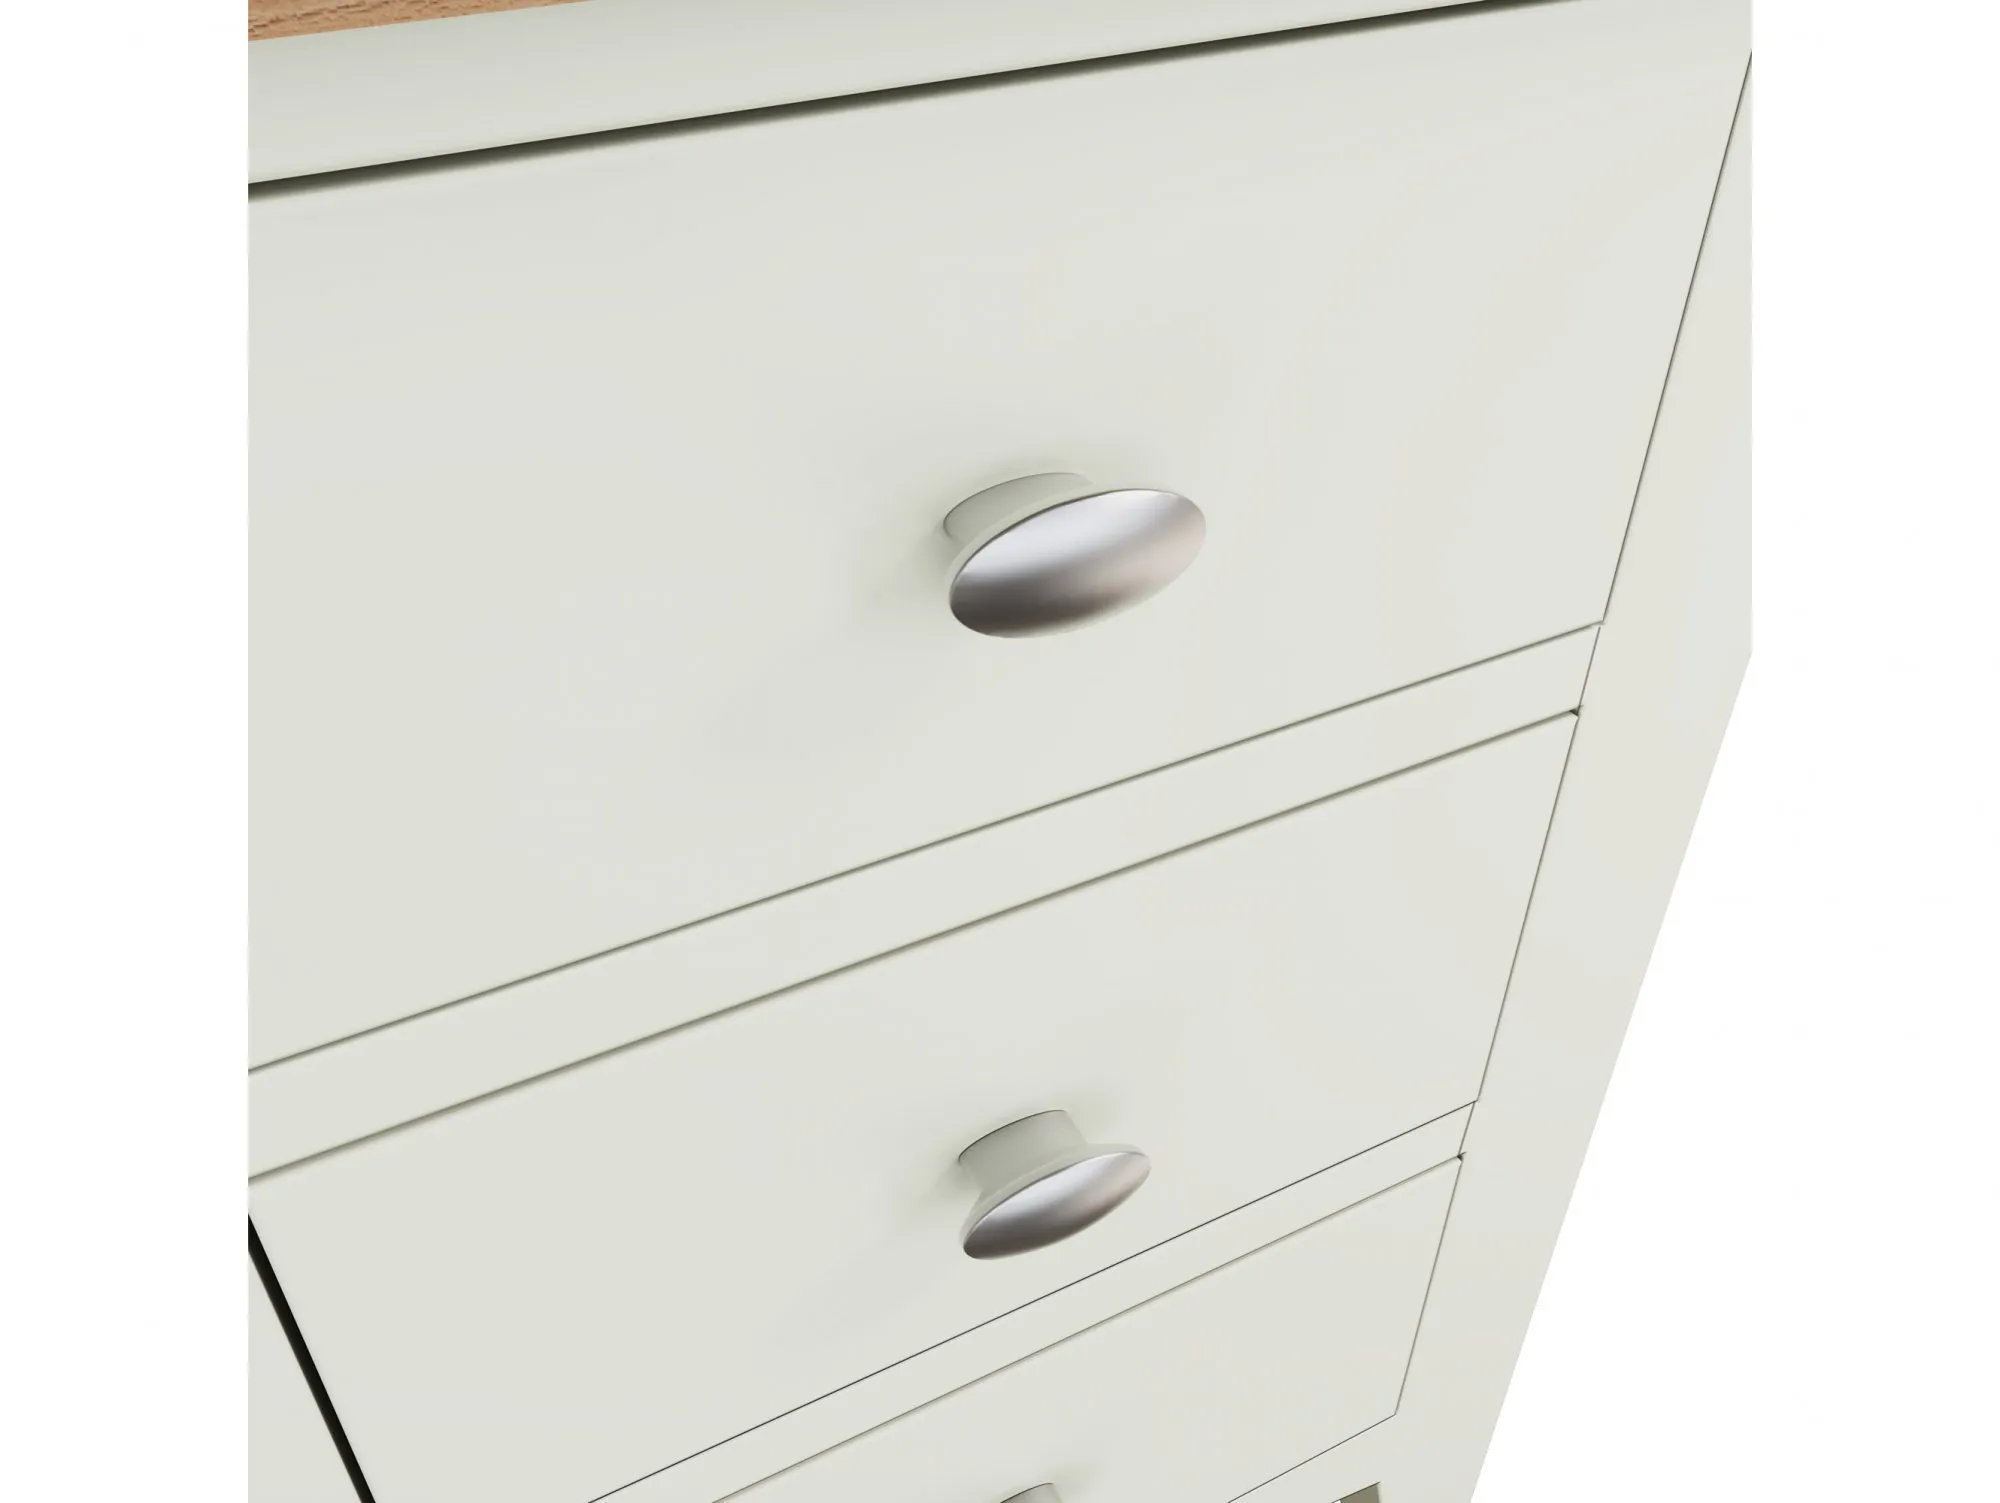 Kenmore Kenmore Patterdale White and Oak 3 Drawer Large Bedside Table (Assembled)